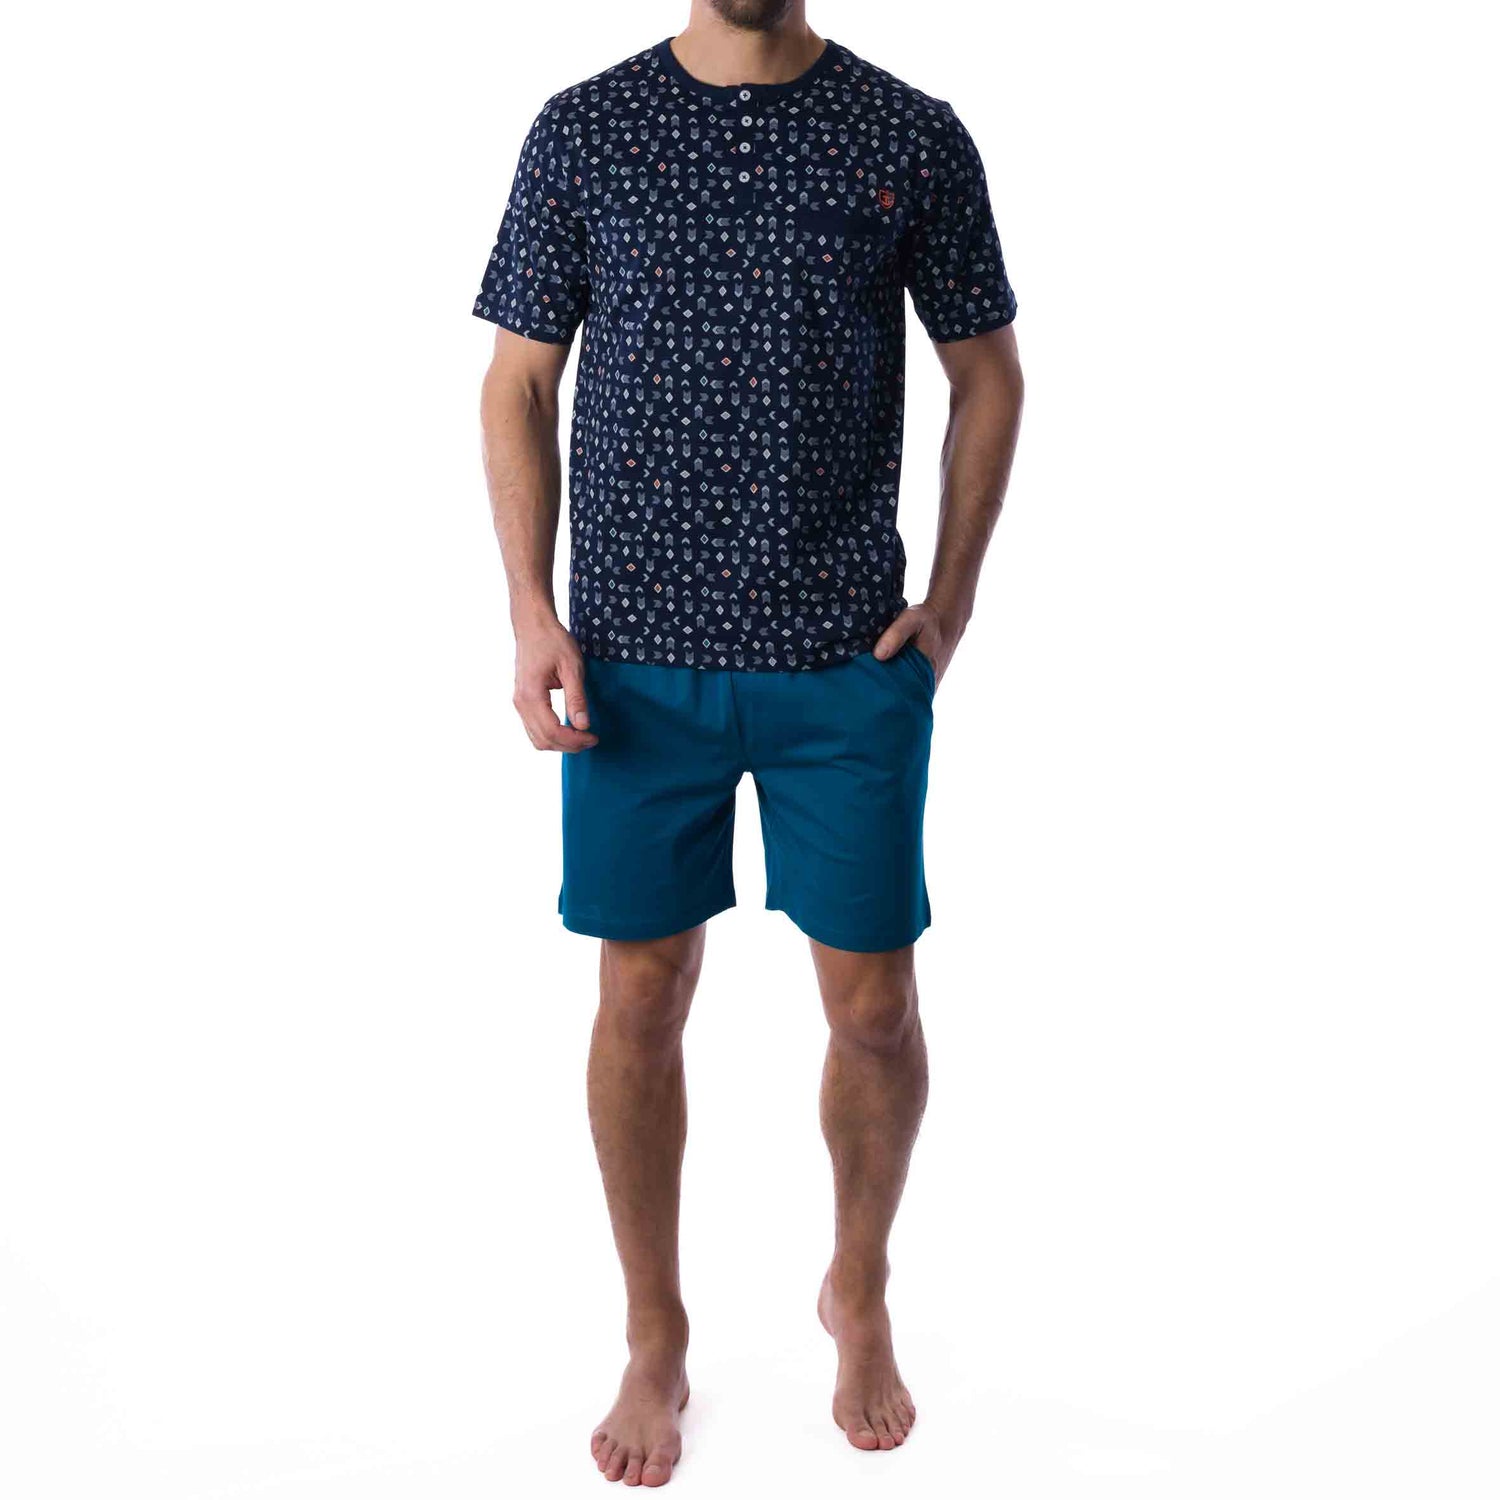 Short Pajamas with Buttoned Collar in Navy and Blue Printed Mercerized Cotton Jersey